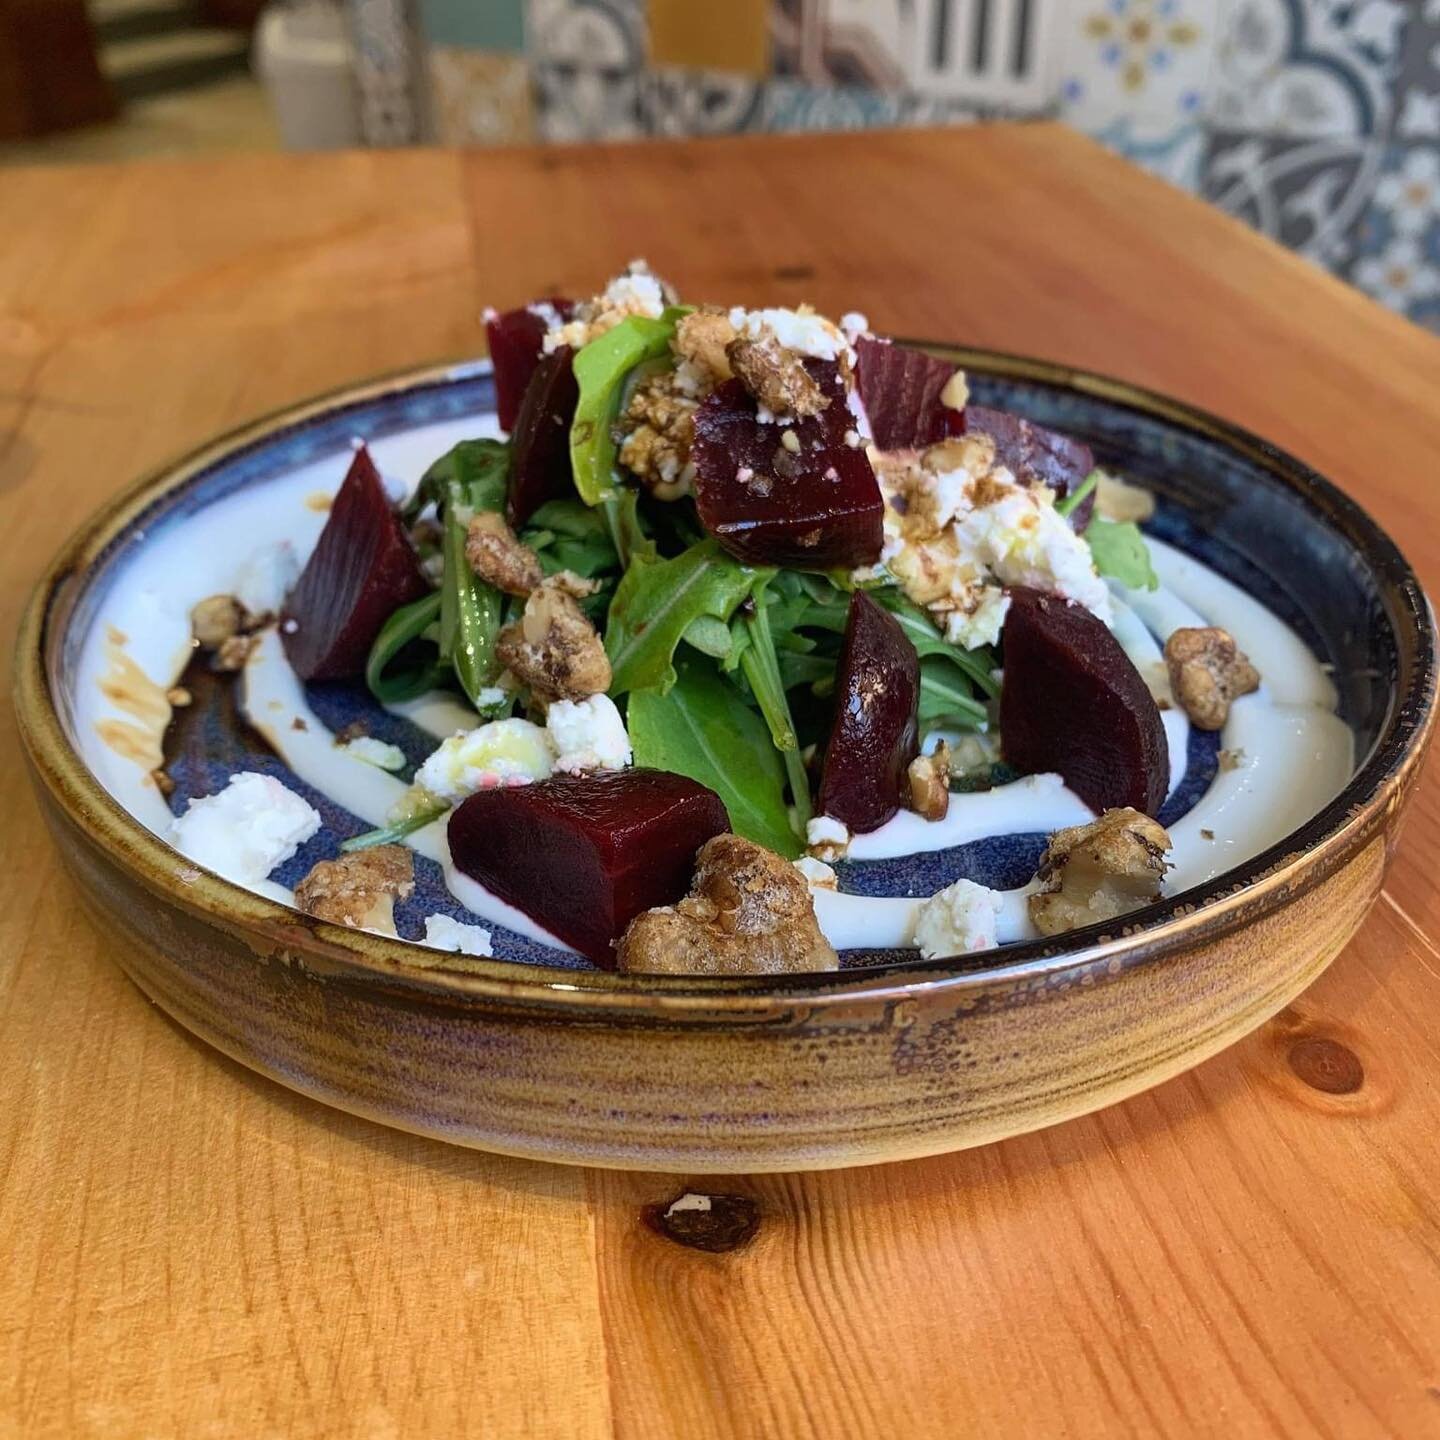 Our goats cheese, beetroot &amp; walnut salad 😍